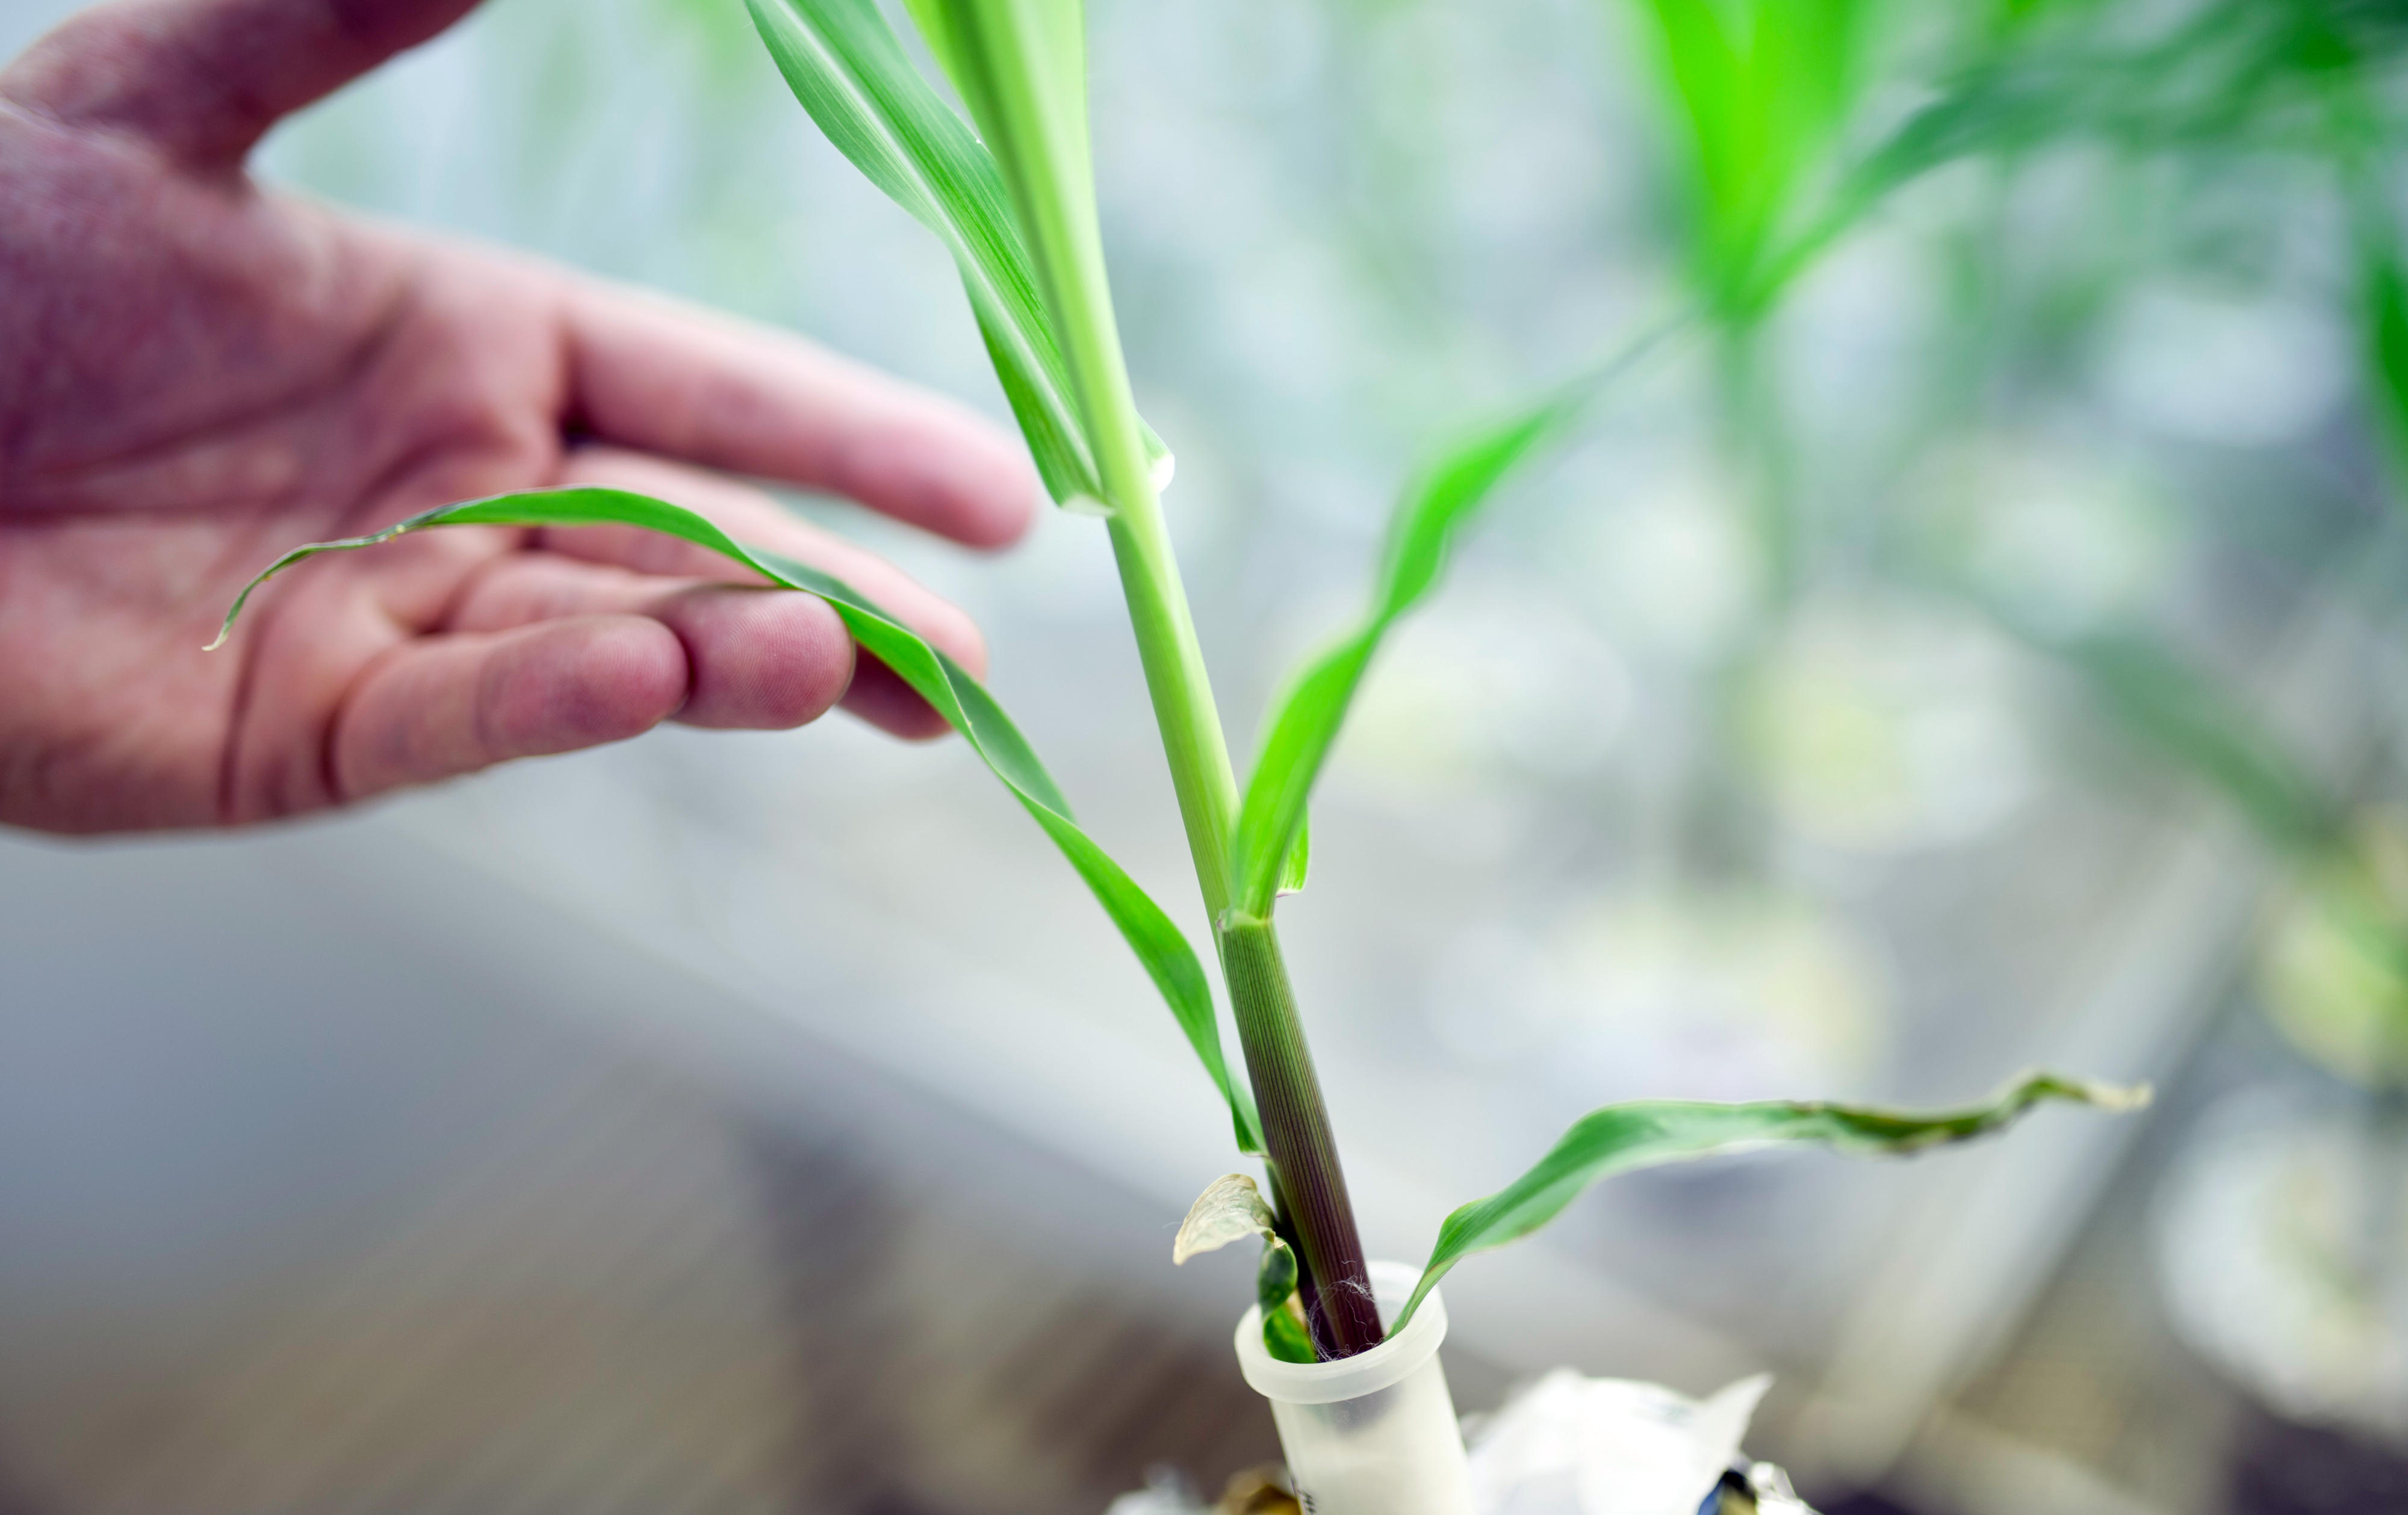 Young maize plant in a research laboratory